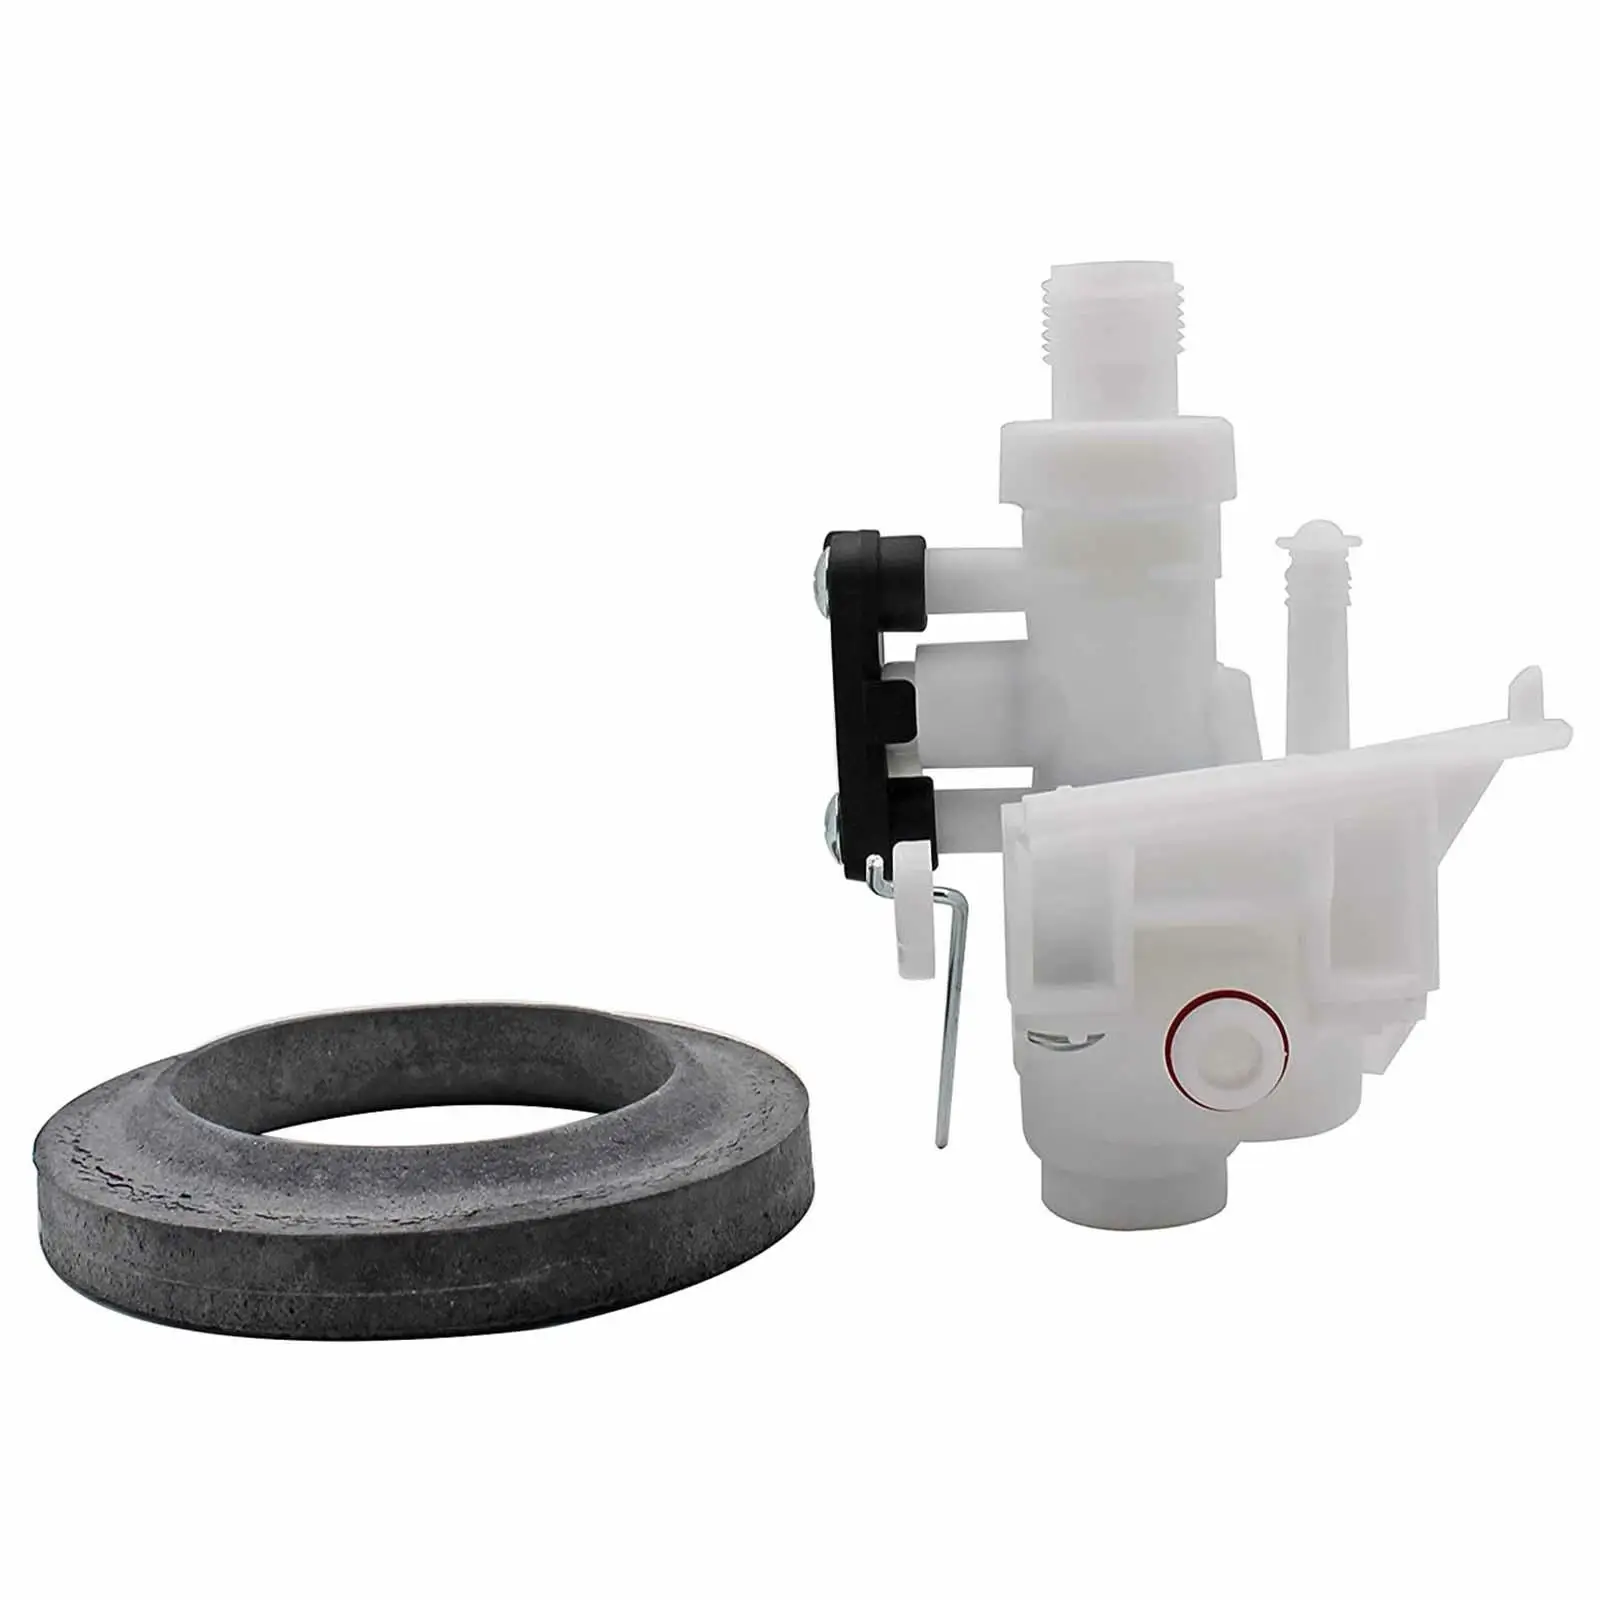 31705 RV Toilet Water Valve Toilet Water Module Assembly for Camper RV